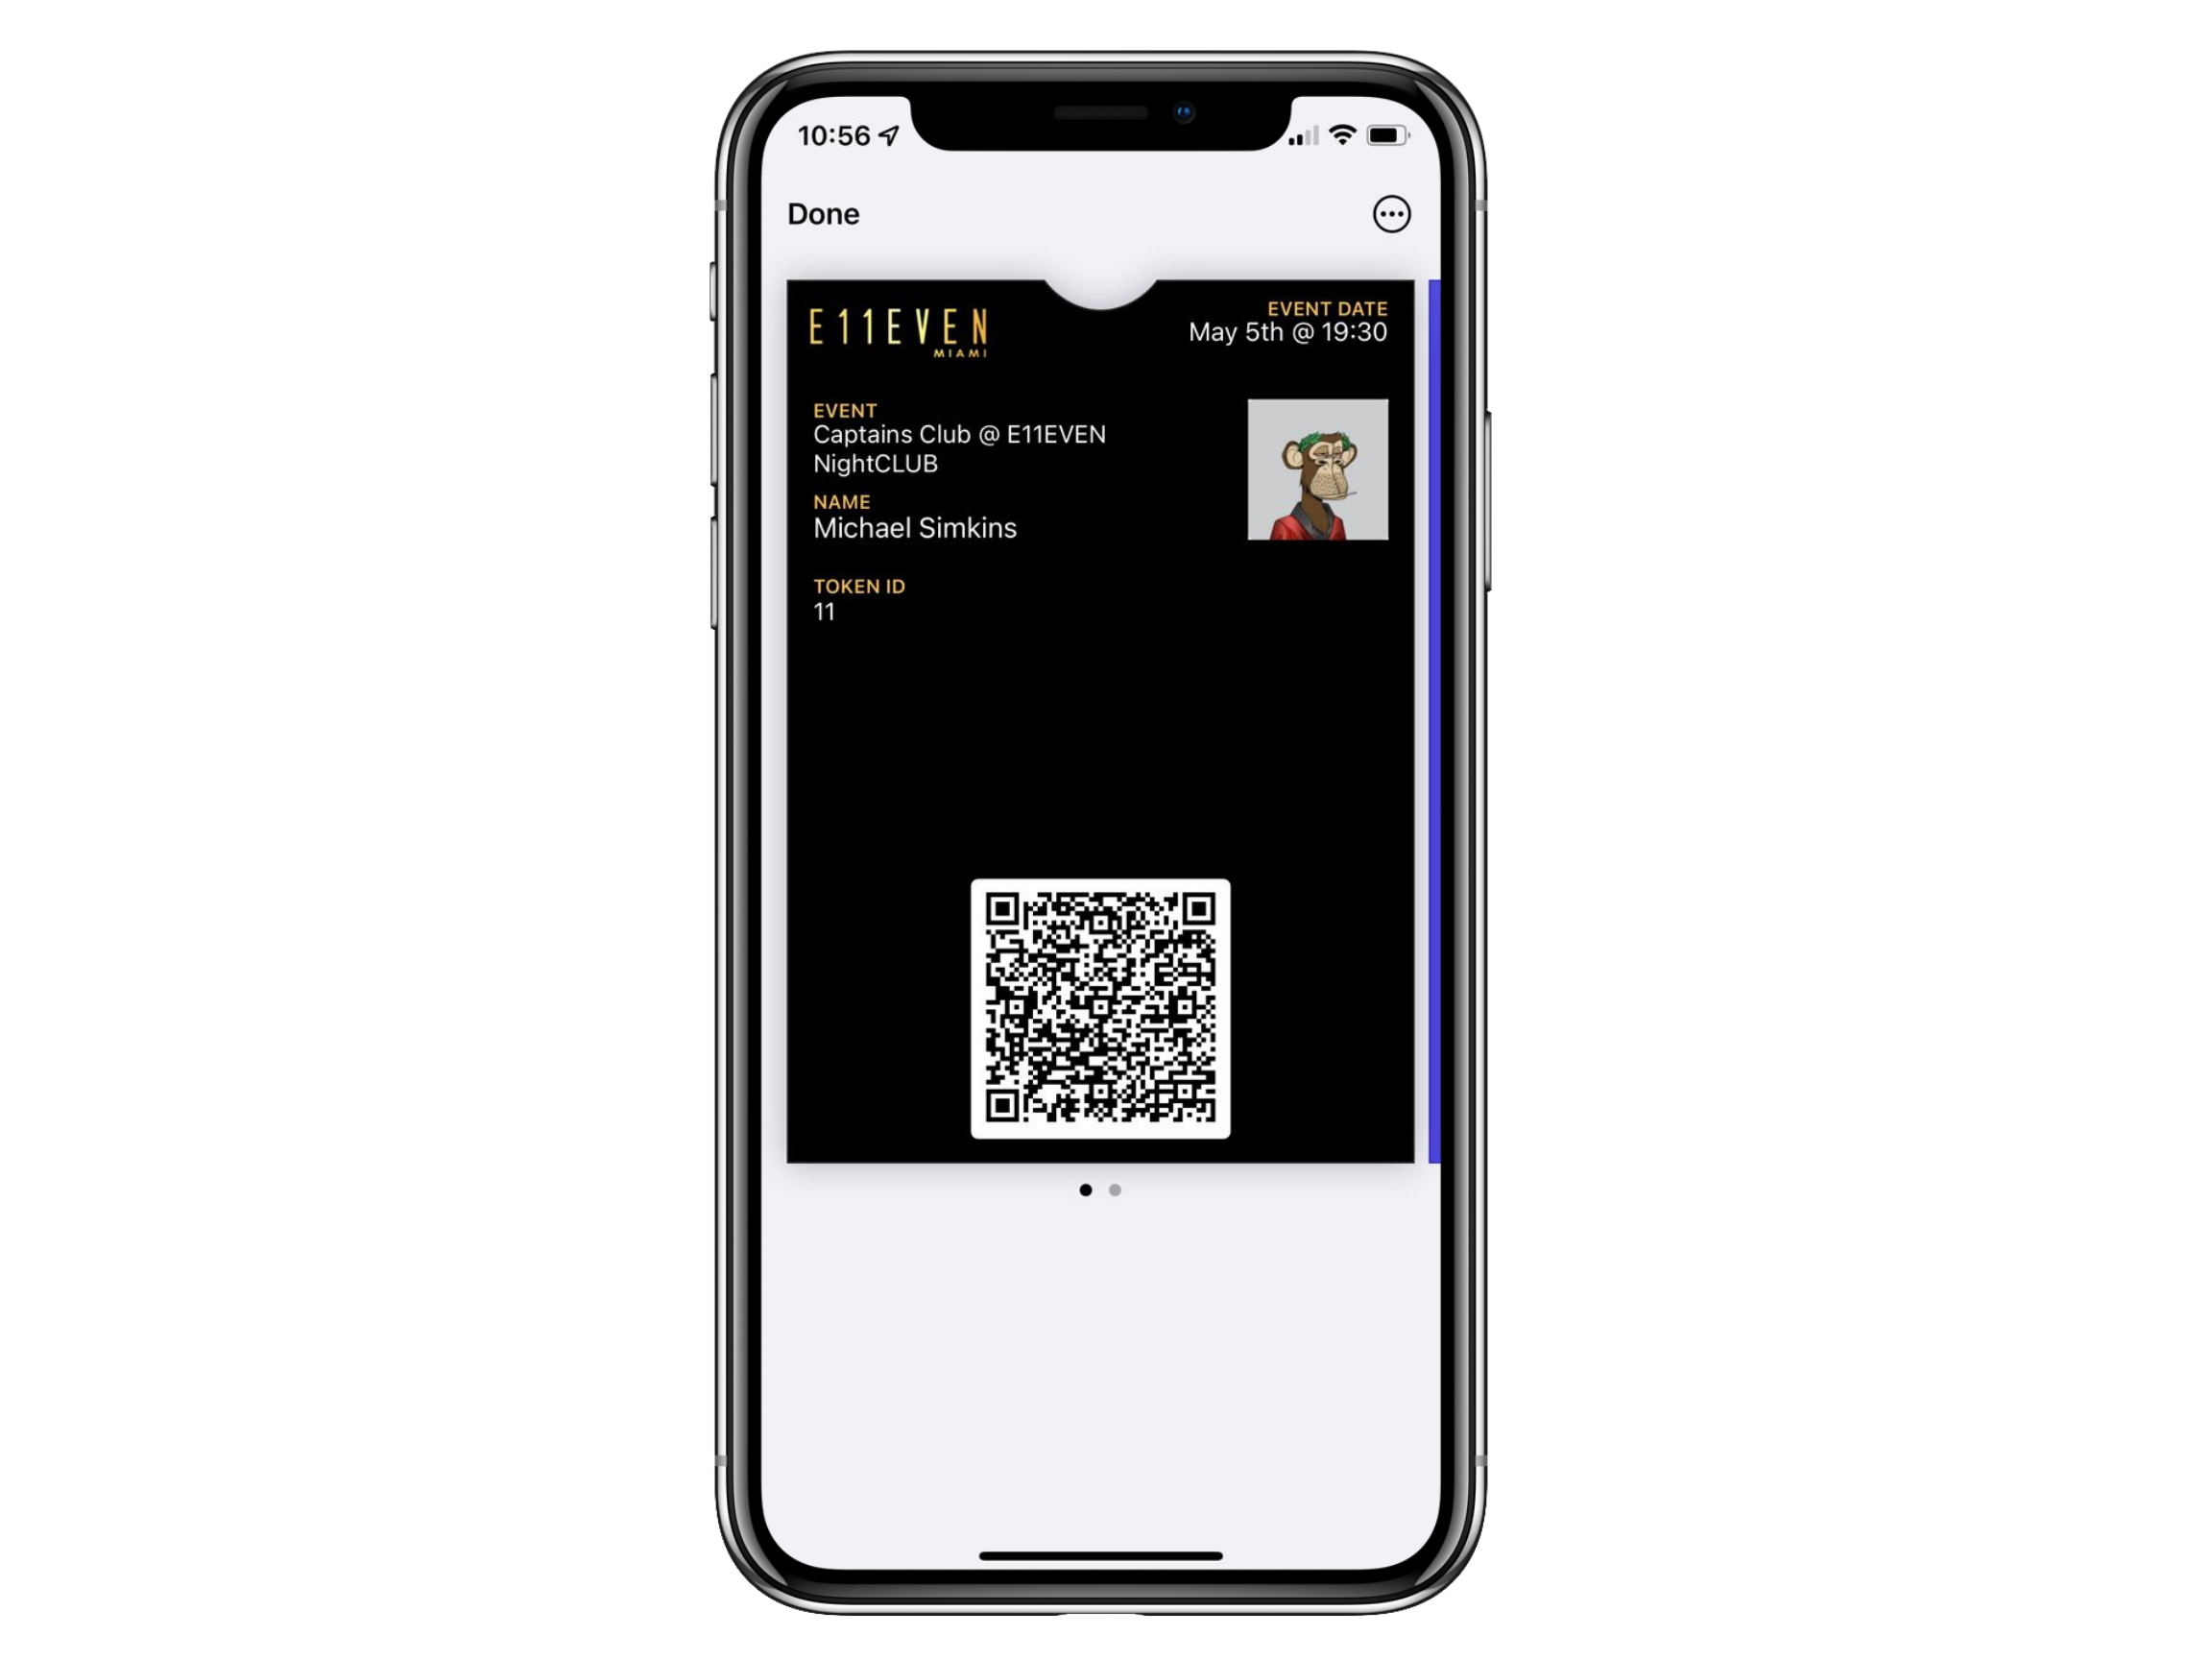 Captains’ Club Pass in NFT Holders’ Apple Wallet